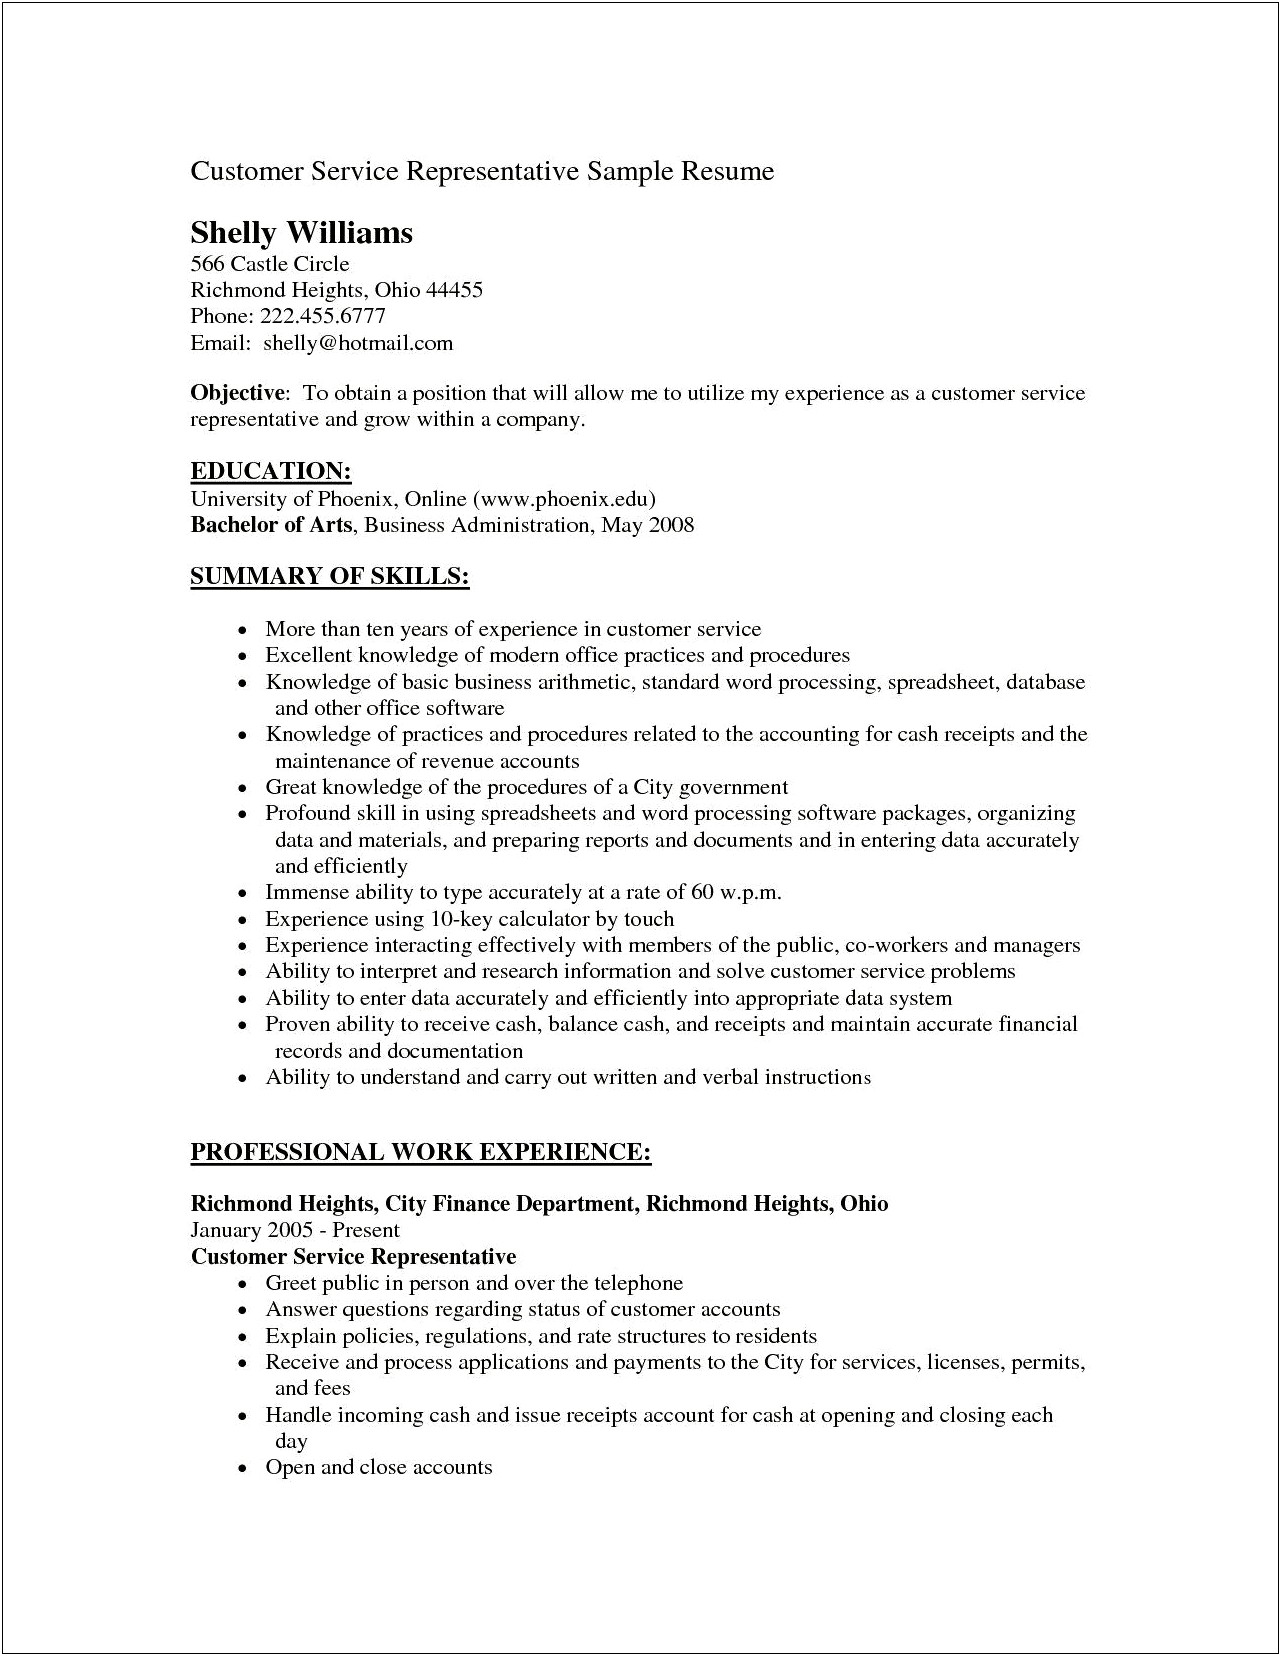 Example Resume Profiles For Customer Service